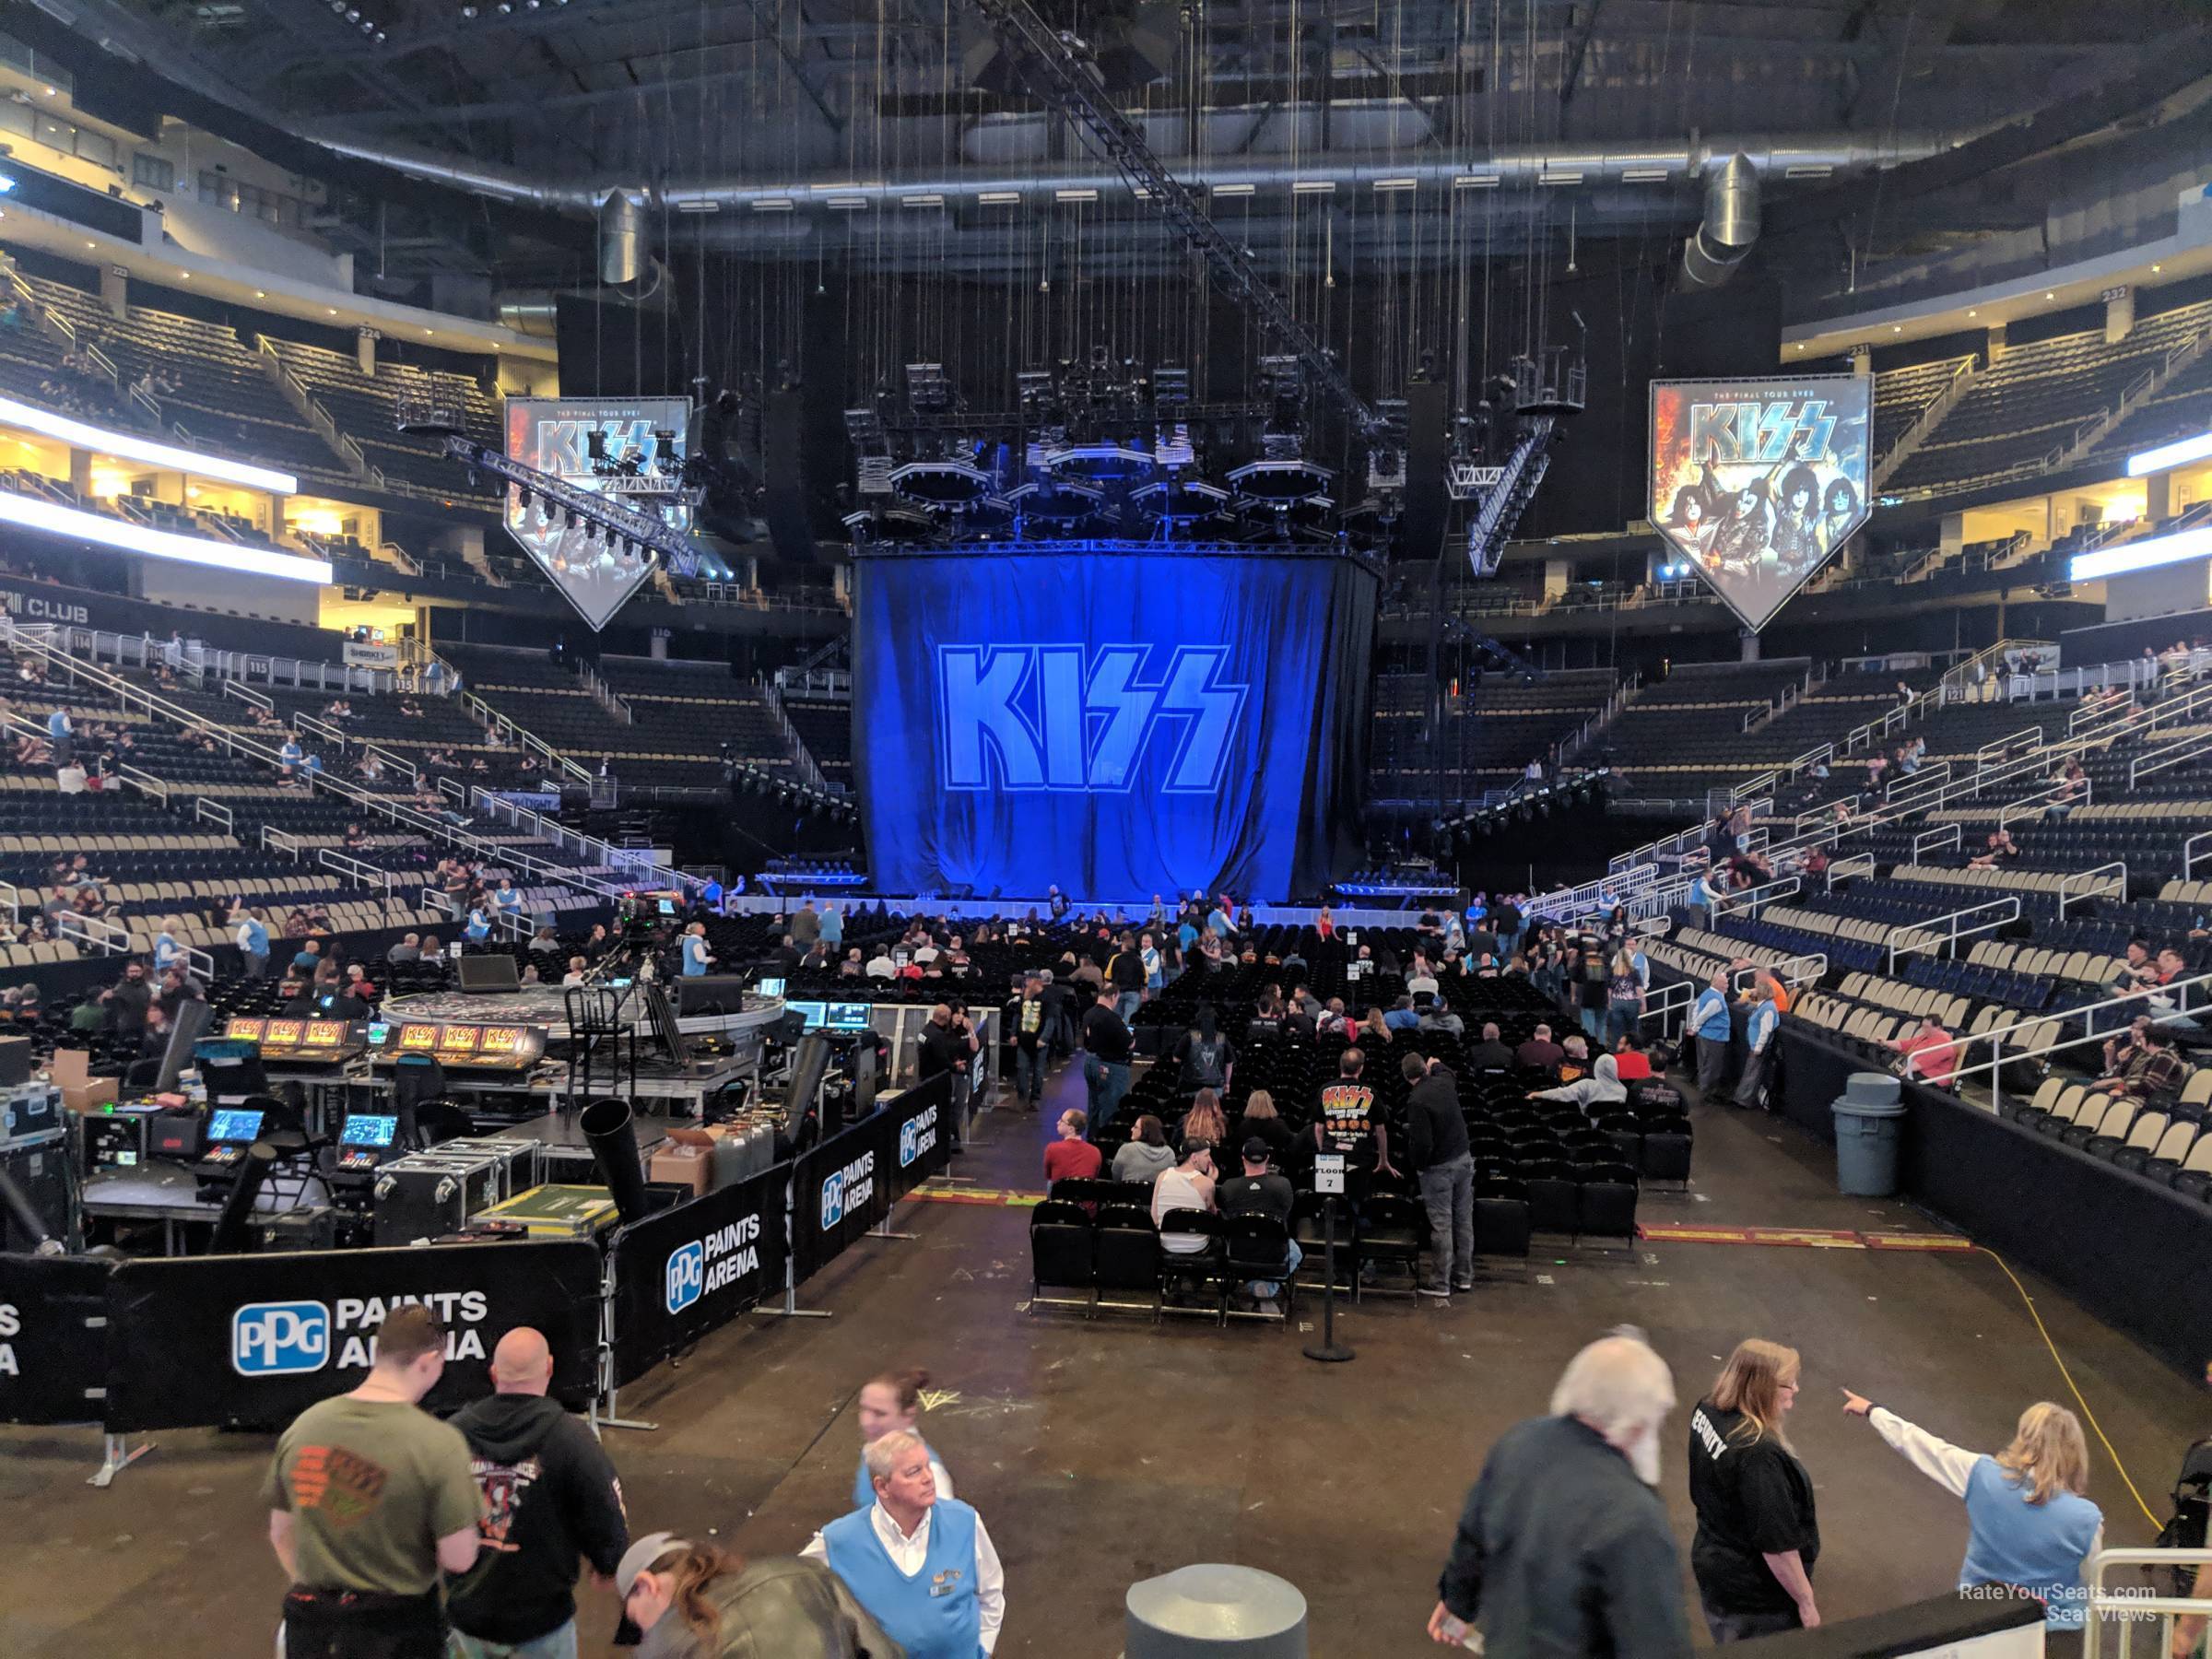 section 106, row e seat view  for concert - ppg paints arena